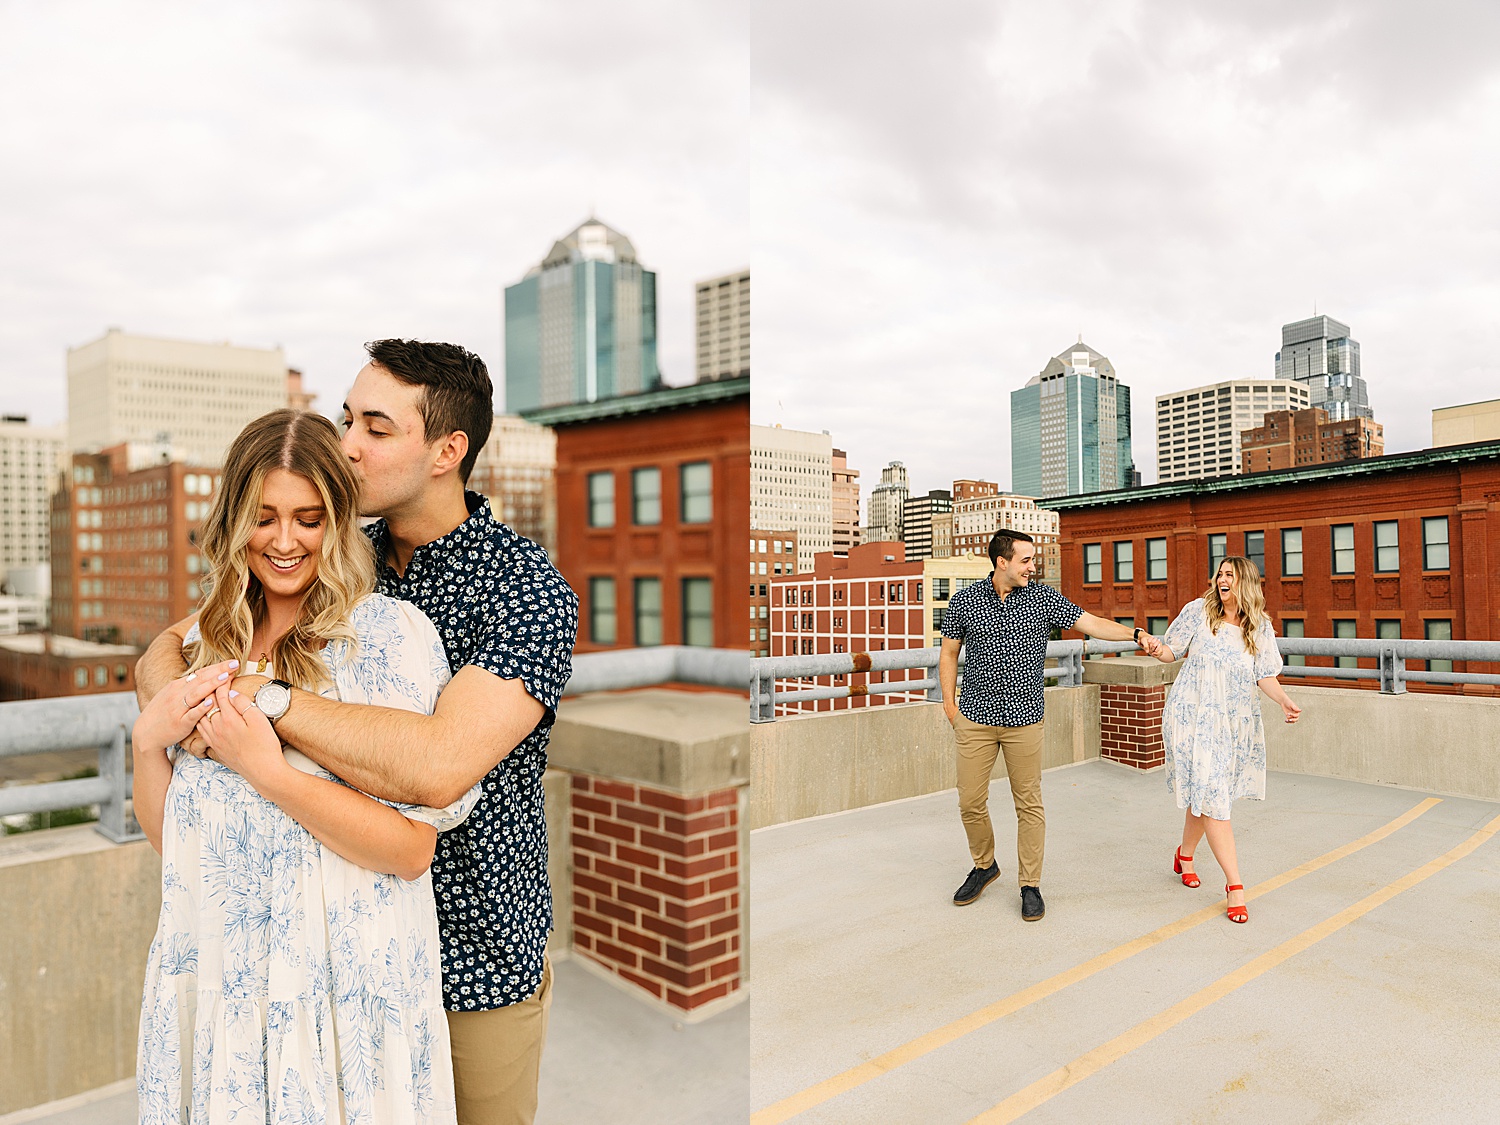 engaged couples walking in Kansas City rooftop wearing red heals 